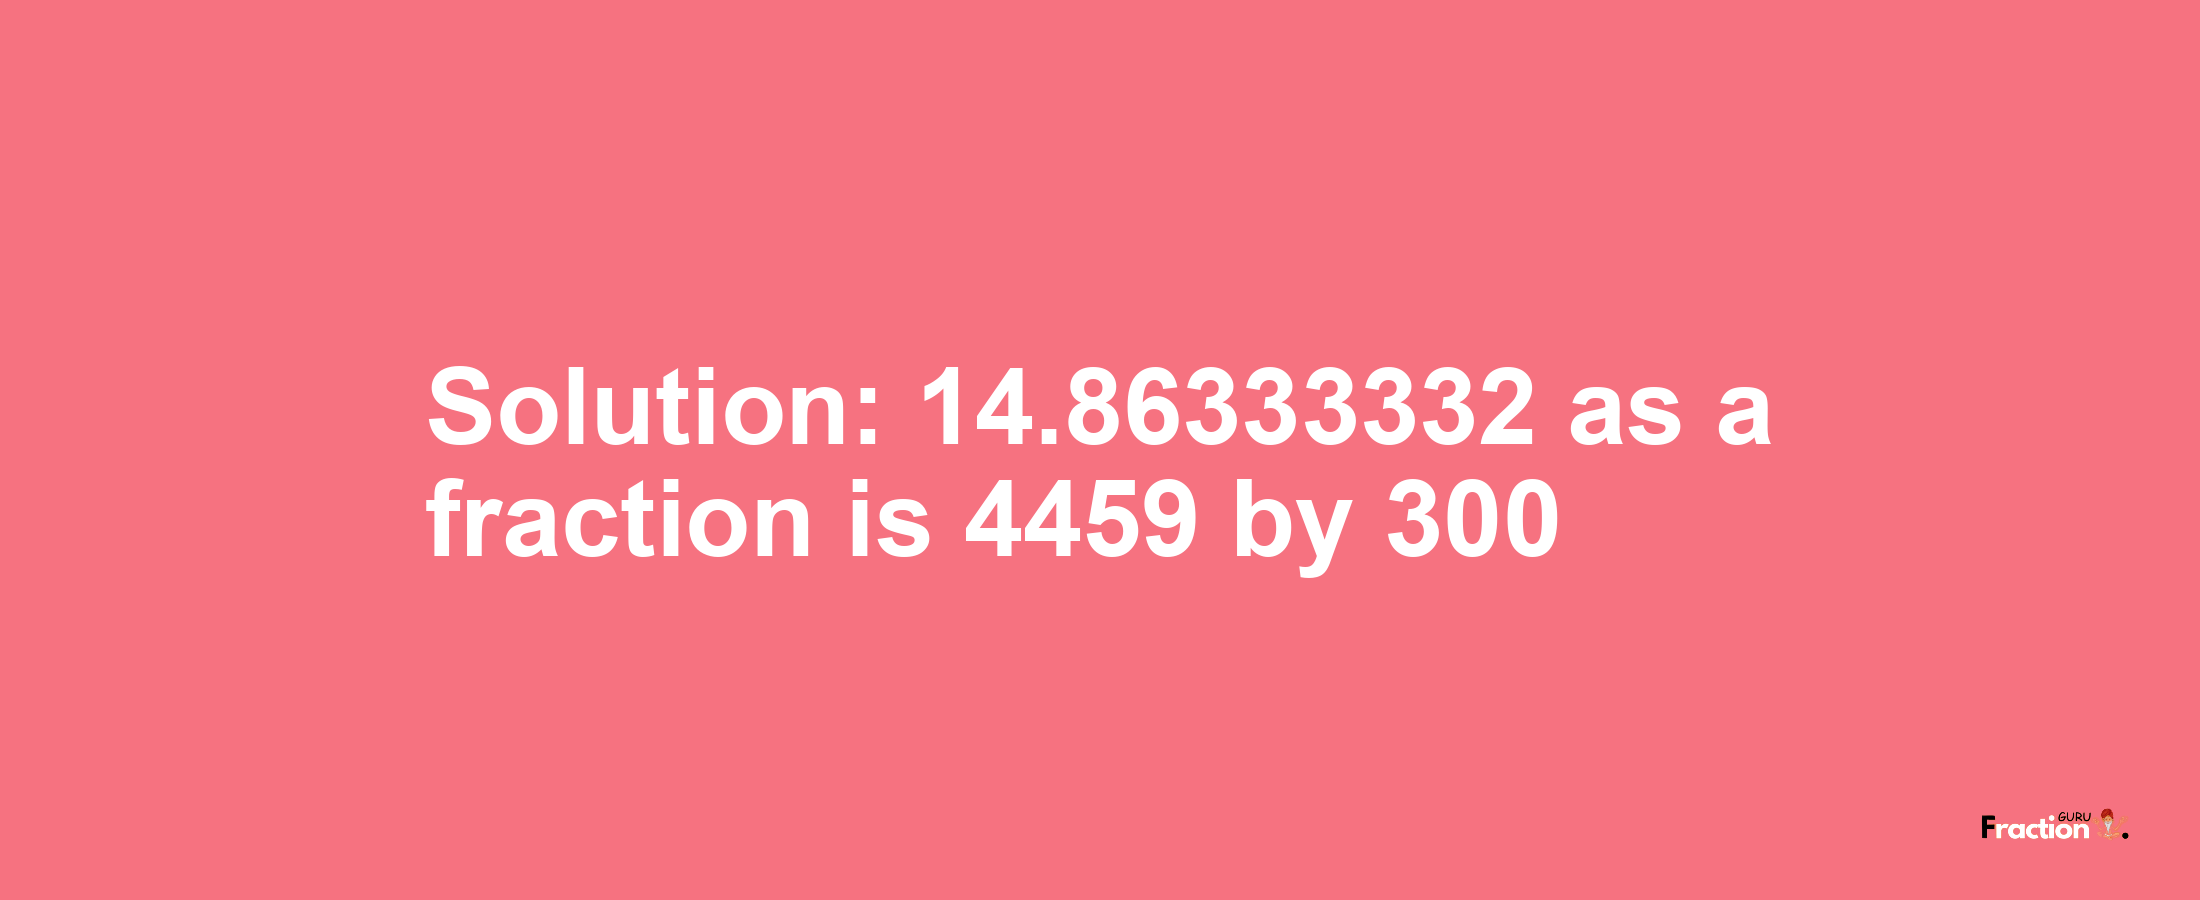 Solution:14.86333332 as a fraction is 4459/300